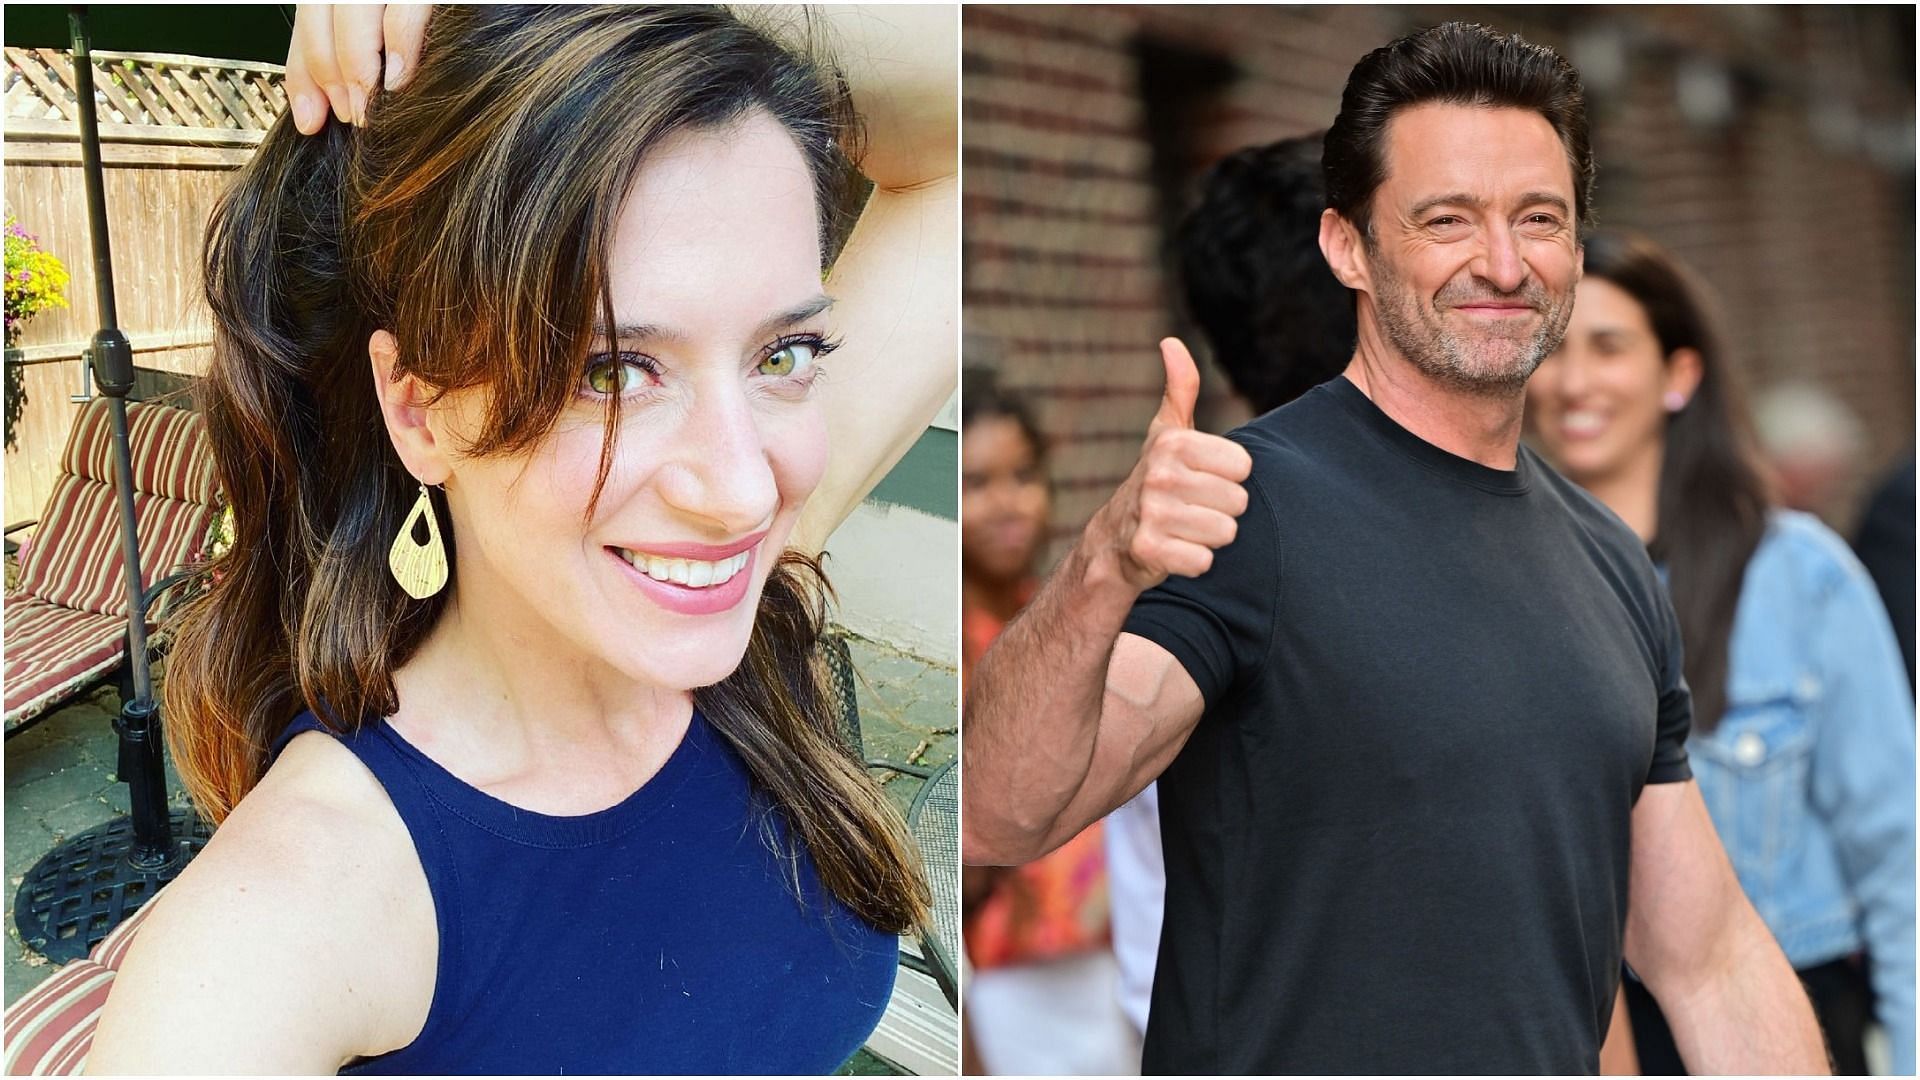 Kathy Voytko was praised by Hugh Jackman after she replaced the lead actress in a Broadway (Images by James Devaney via Getty Images and kathyvoytko/Instagram)